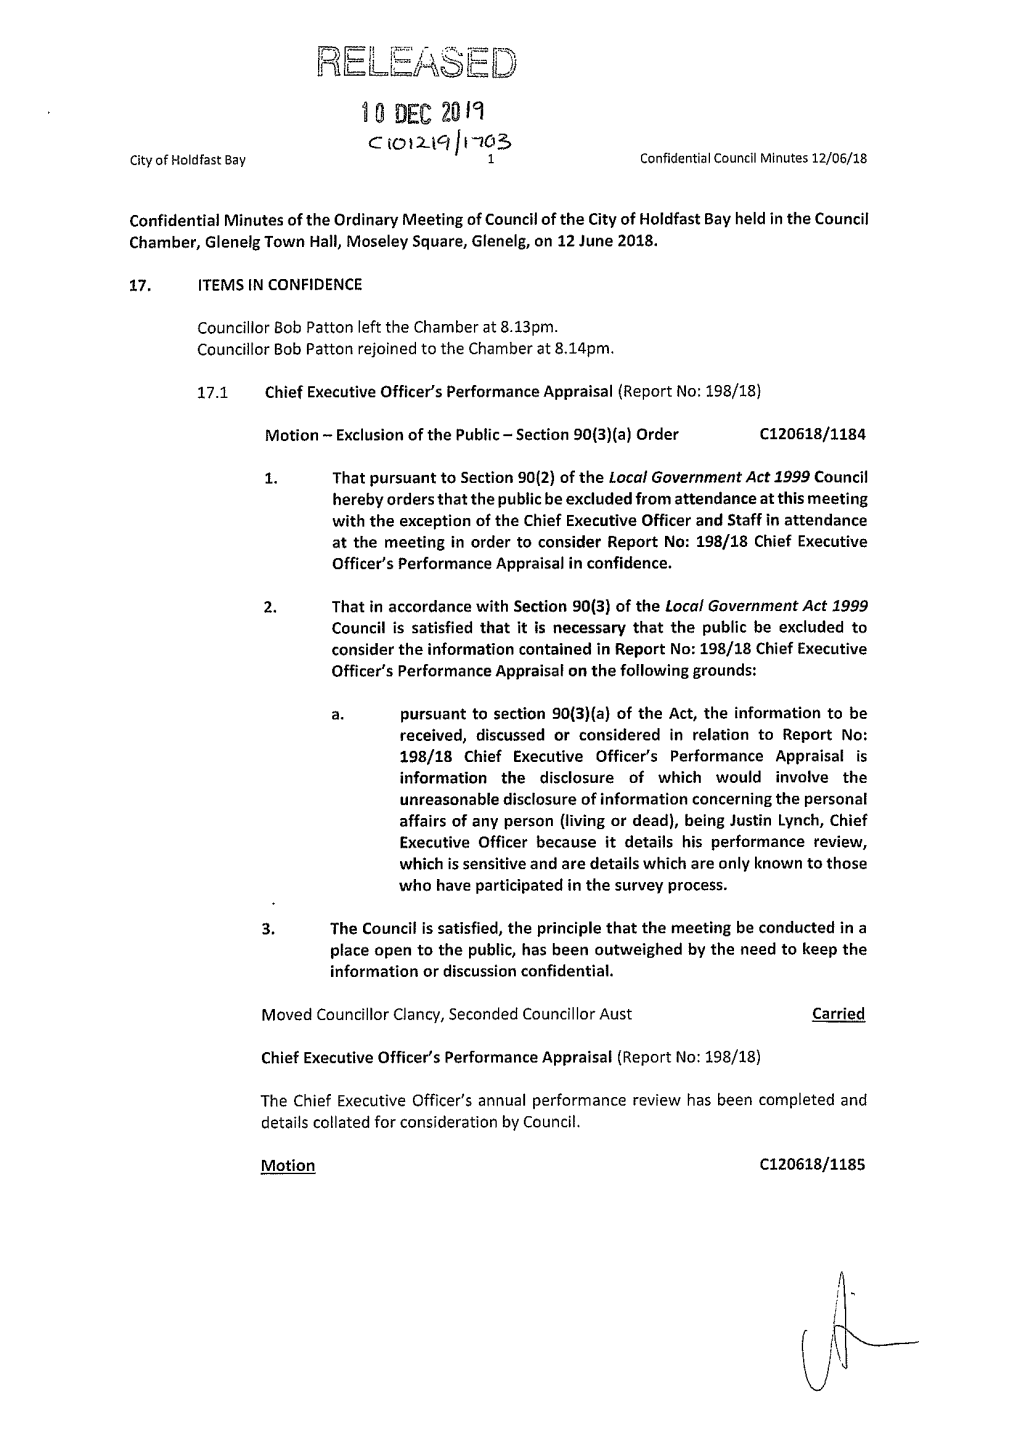 10 DEC 20N Ctoi2 Ictini3 City Ofholdfast Bay Confidential Council Minutes 12/06/18